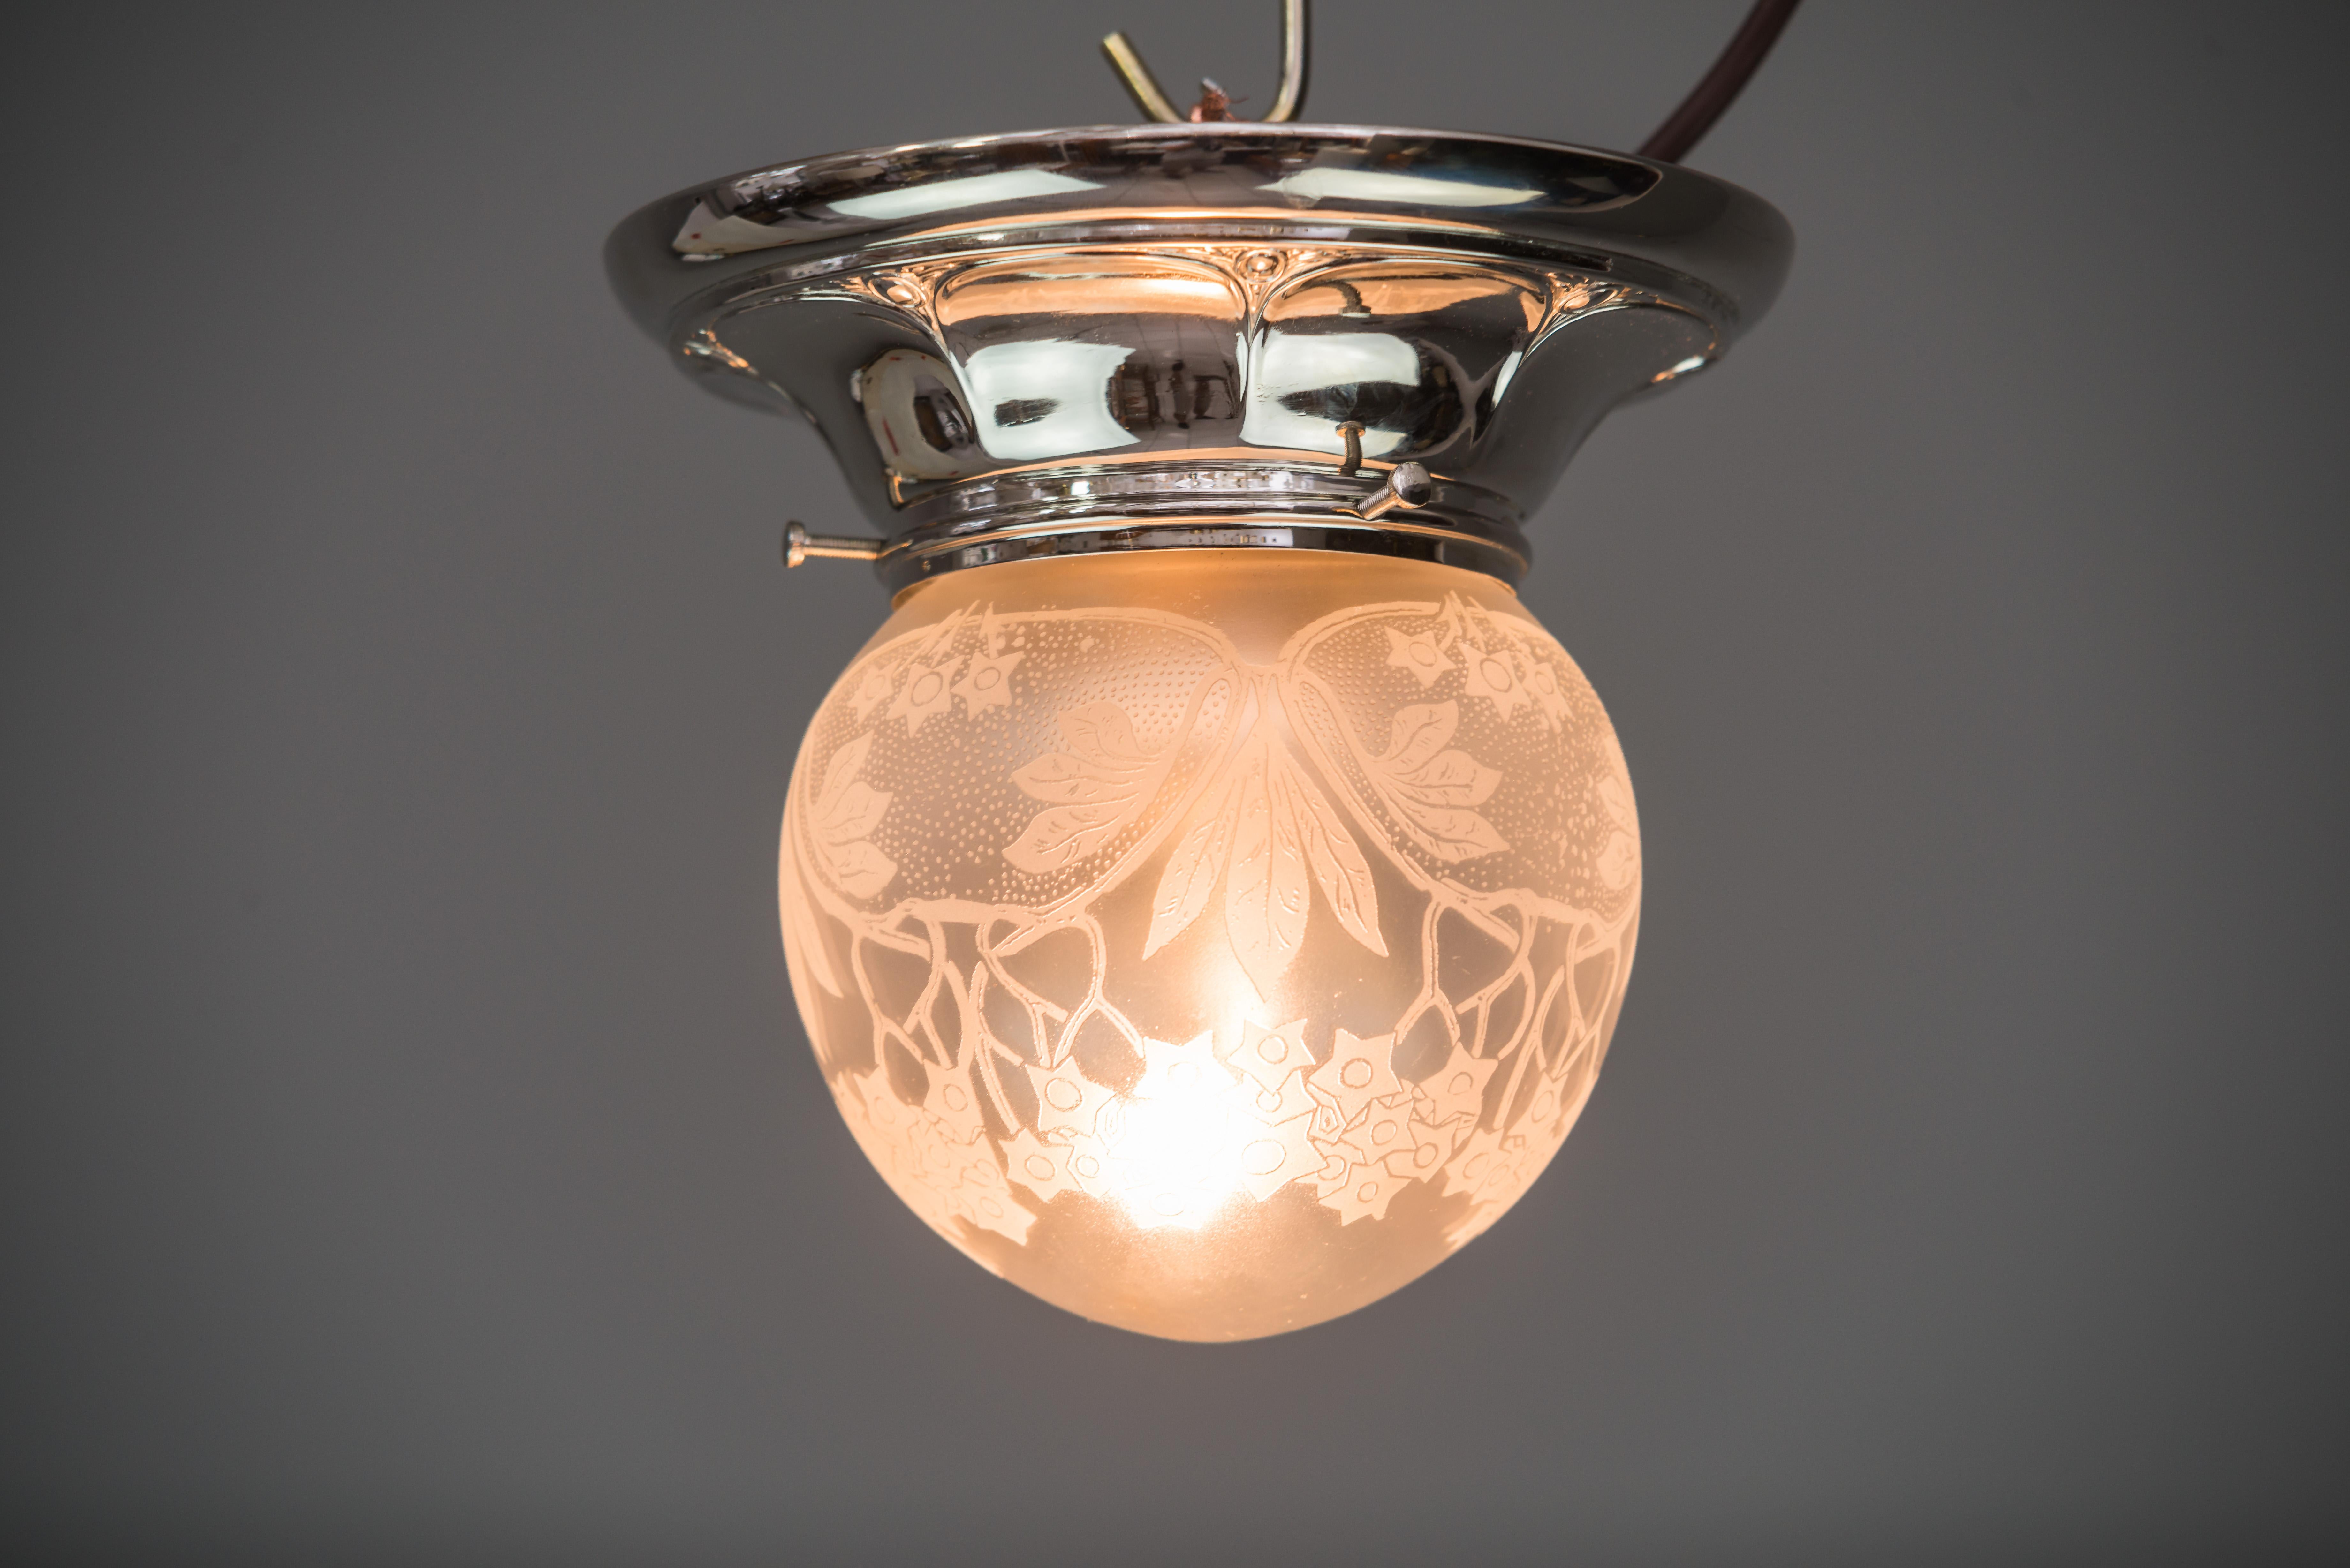 Early 20th Century Small Jugendstil Ceiling Lamp, circa 1907